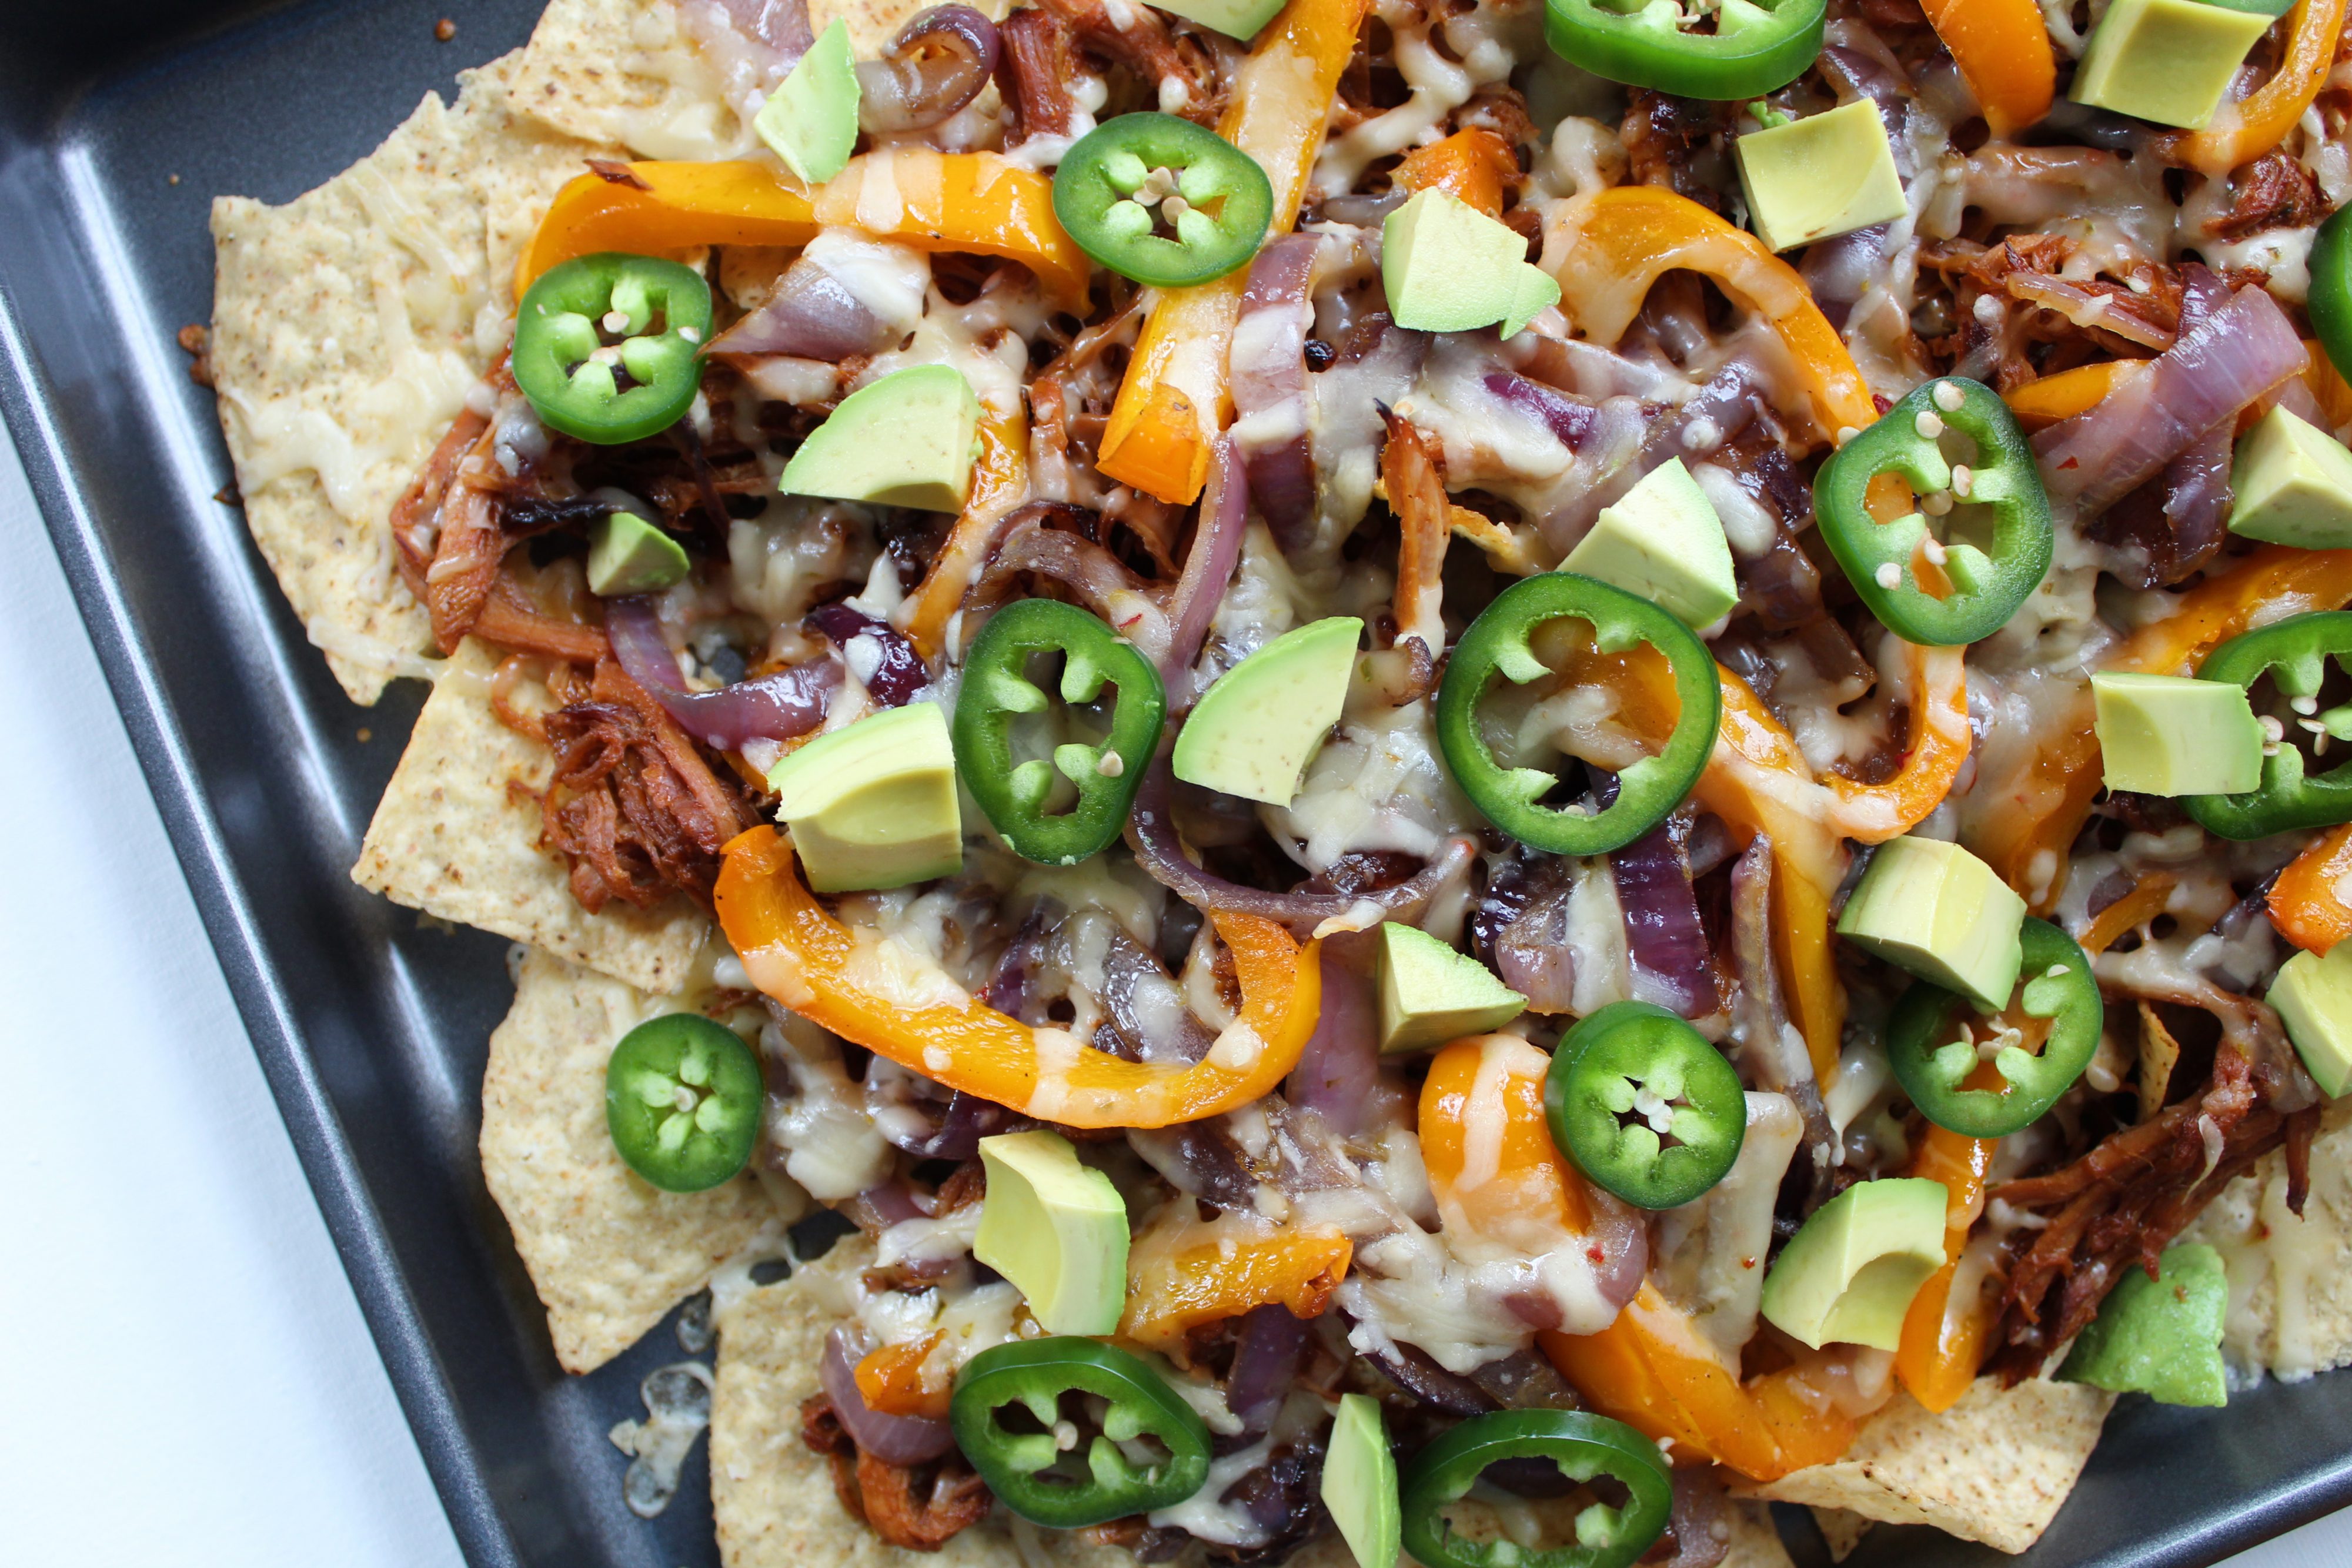 These nachos are topped with BBQ pork, fajita-style peppers and onions, and more fun toppings, and they'll make great party food!